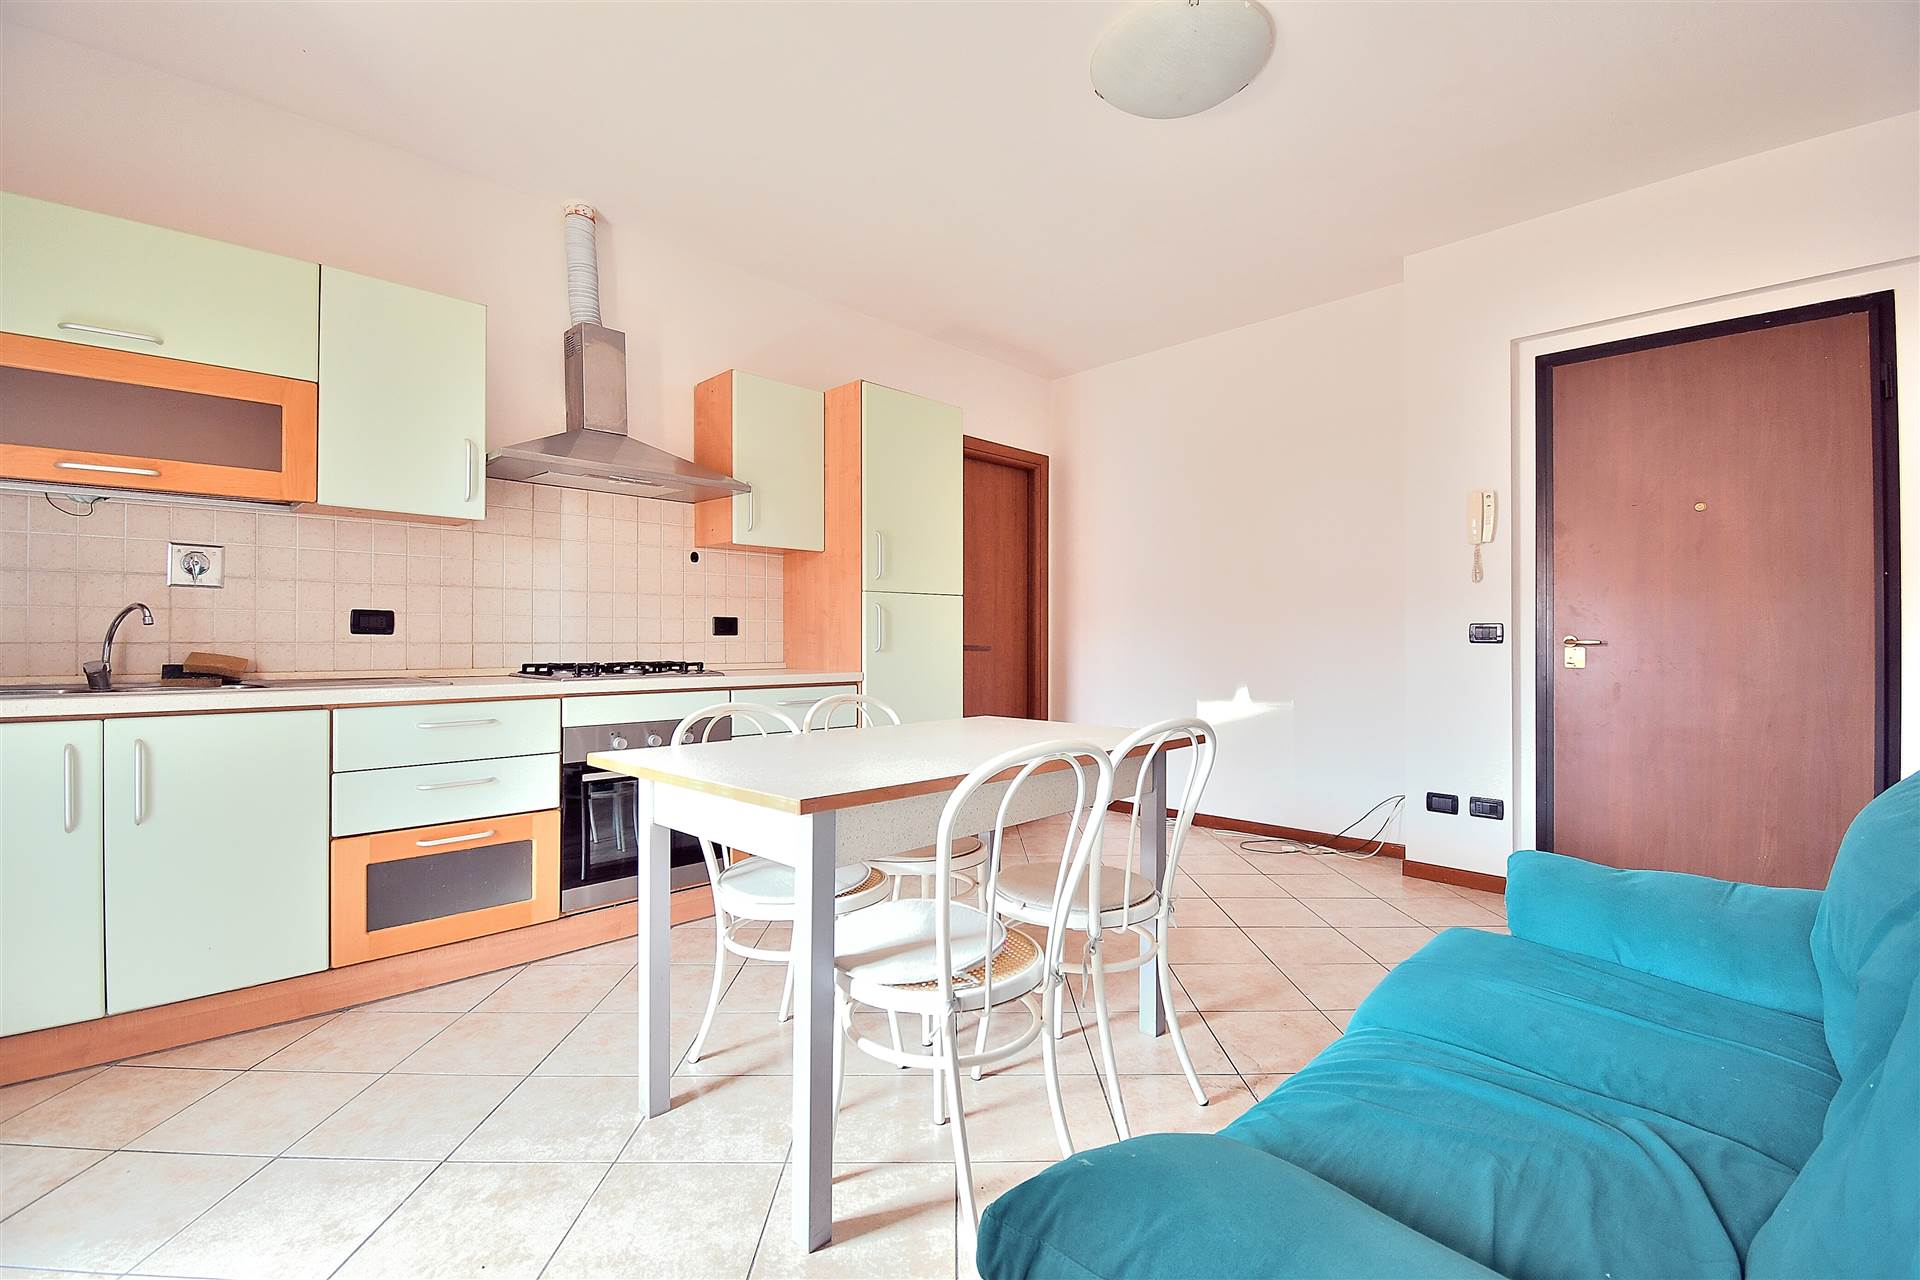 COLLE DI VAL D'ELSA, Apartment for sale of 70 Sq. mt., Excellent Condition, Heating Individual heating system, Energetic class: G, Epi: 175 kwh/m2 year, placed at 1° on 1, composed by: 3 Rooms, 